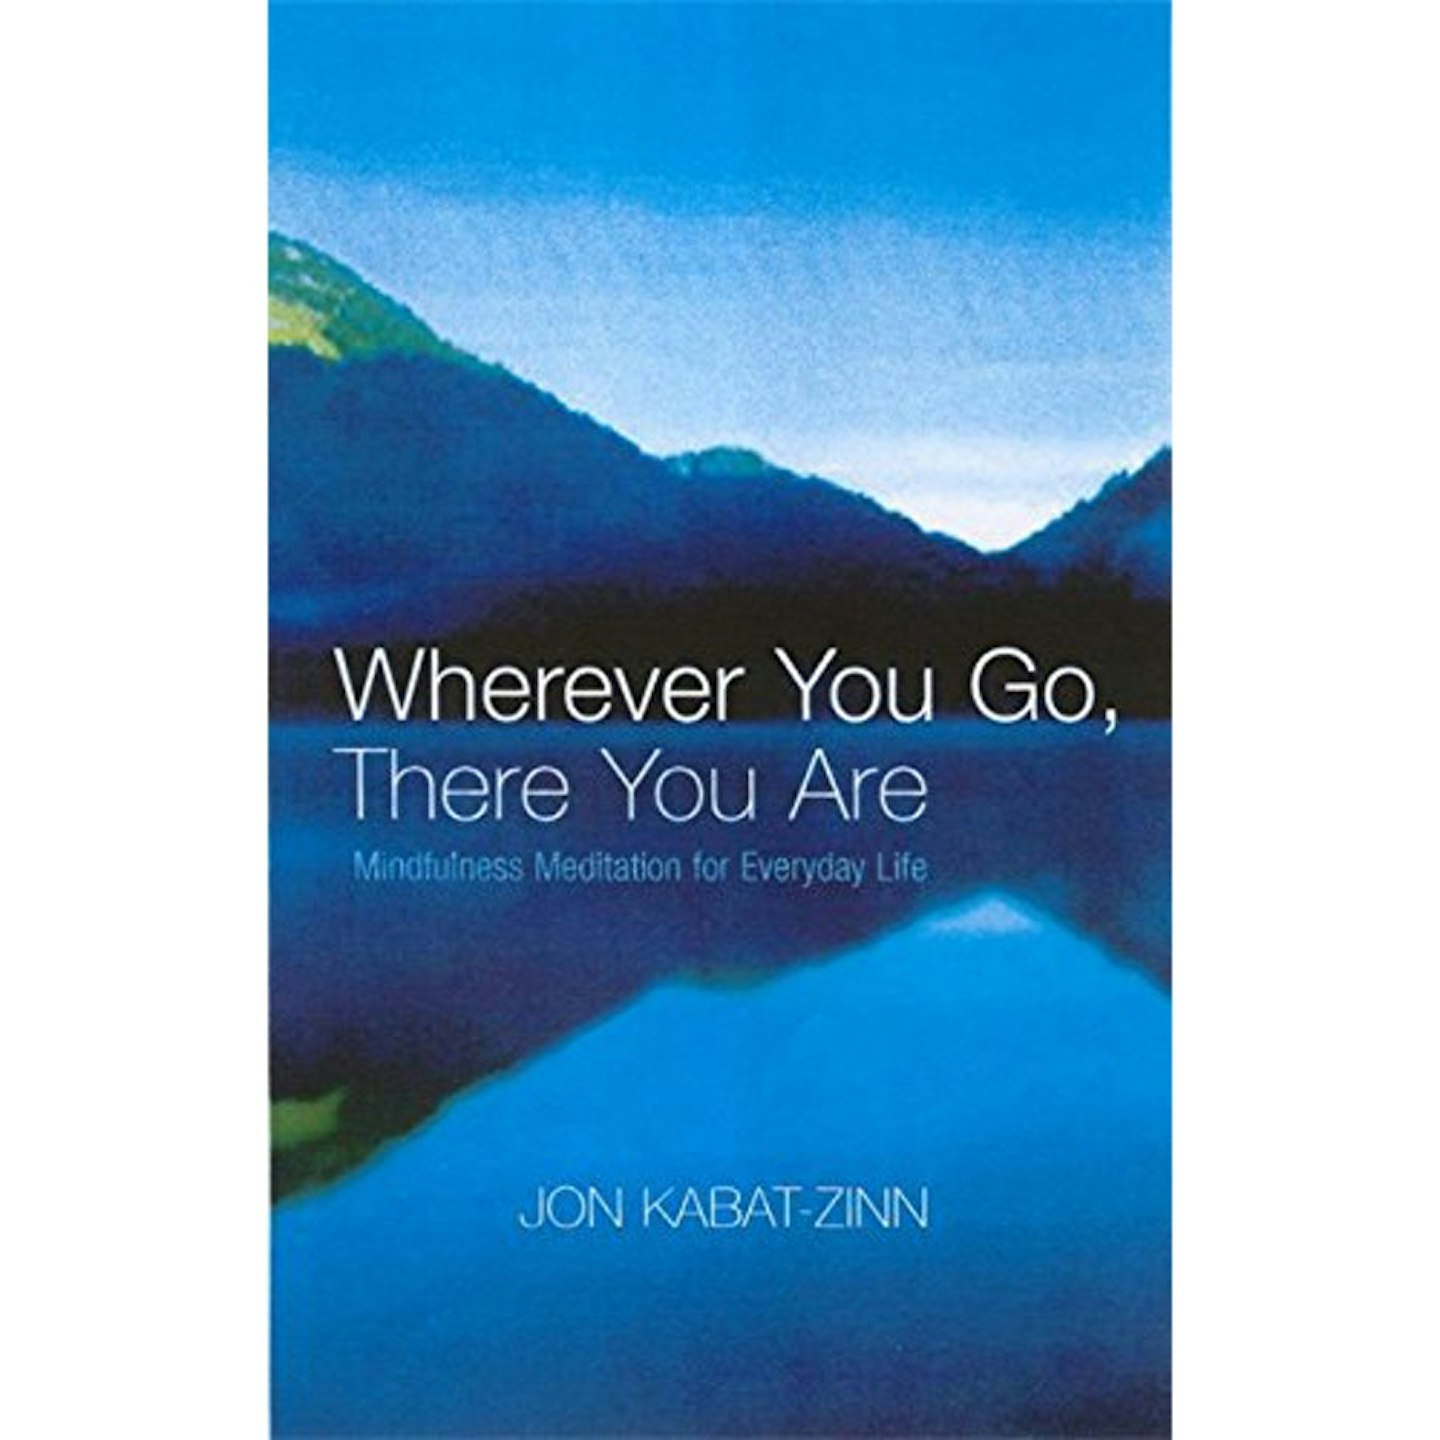 Wherever You Go, There You Are by Jon Kabbat-Zin